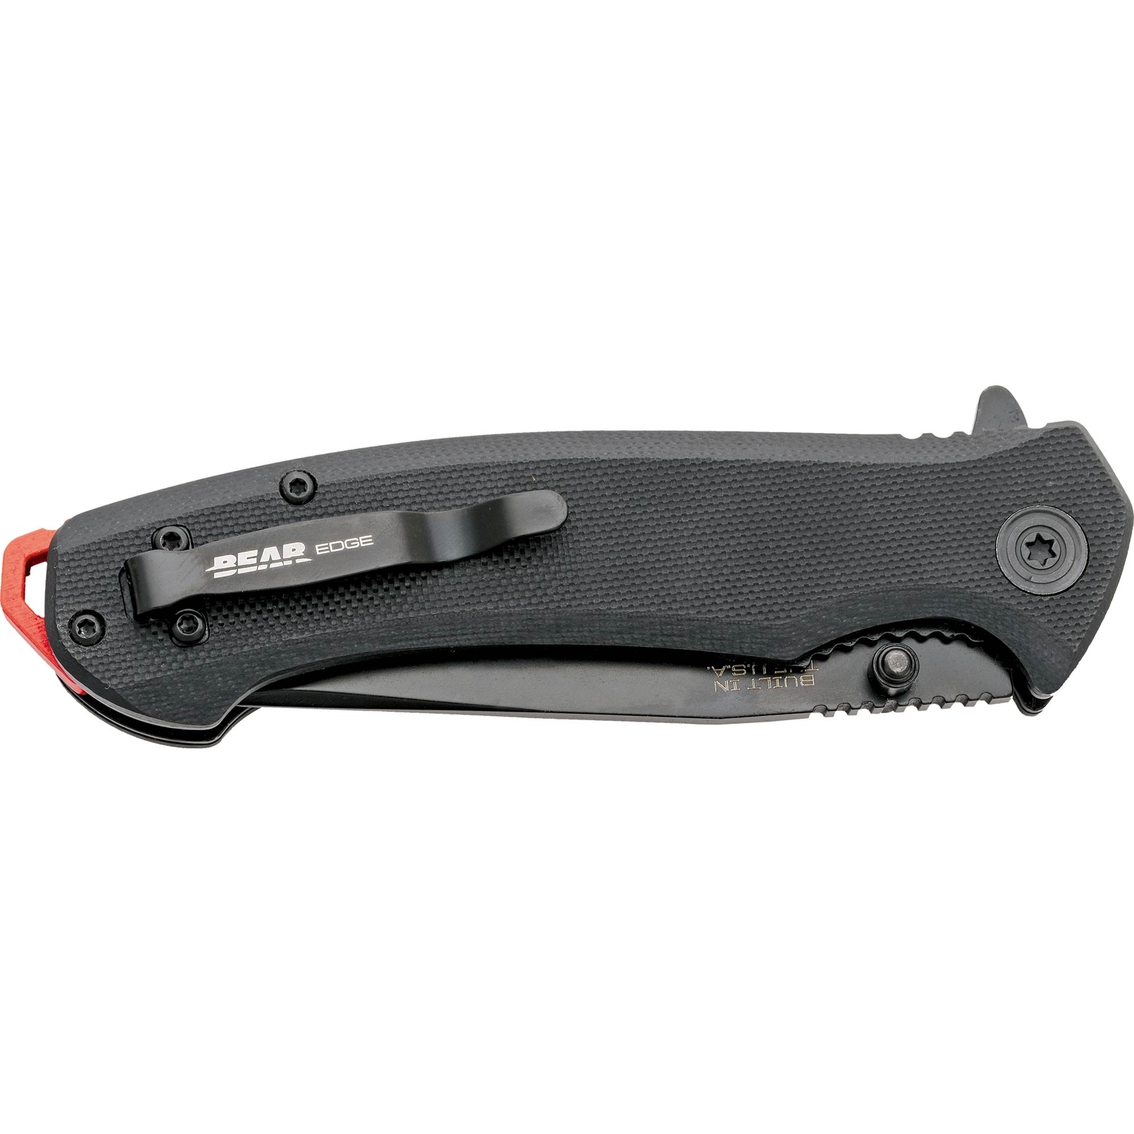 Bear & Son Cutlery 112 4-5/8 in. Black G10 Assisted Opener Knife with Black Blade - Image 2 of 2